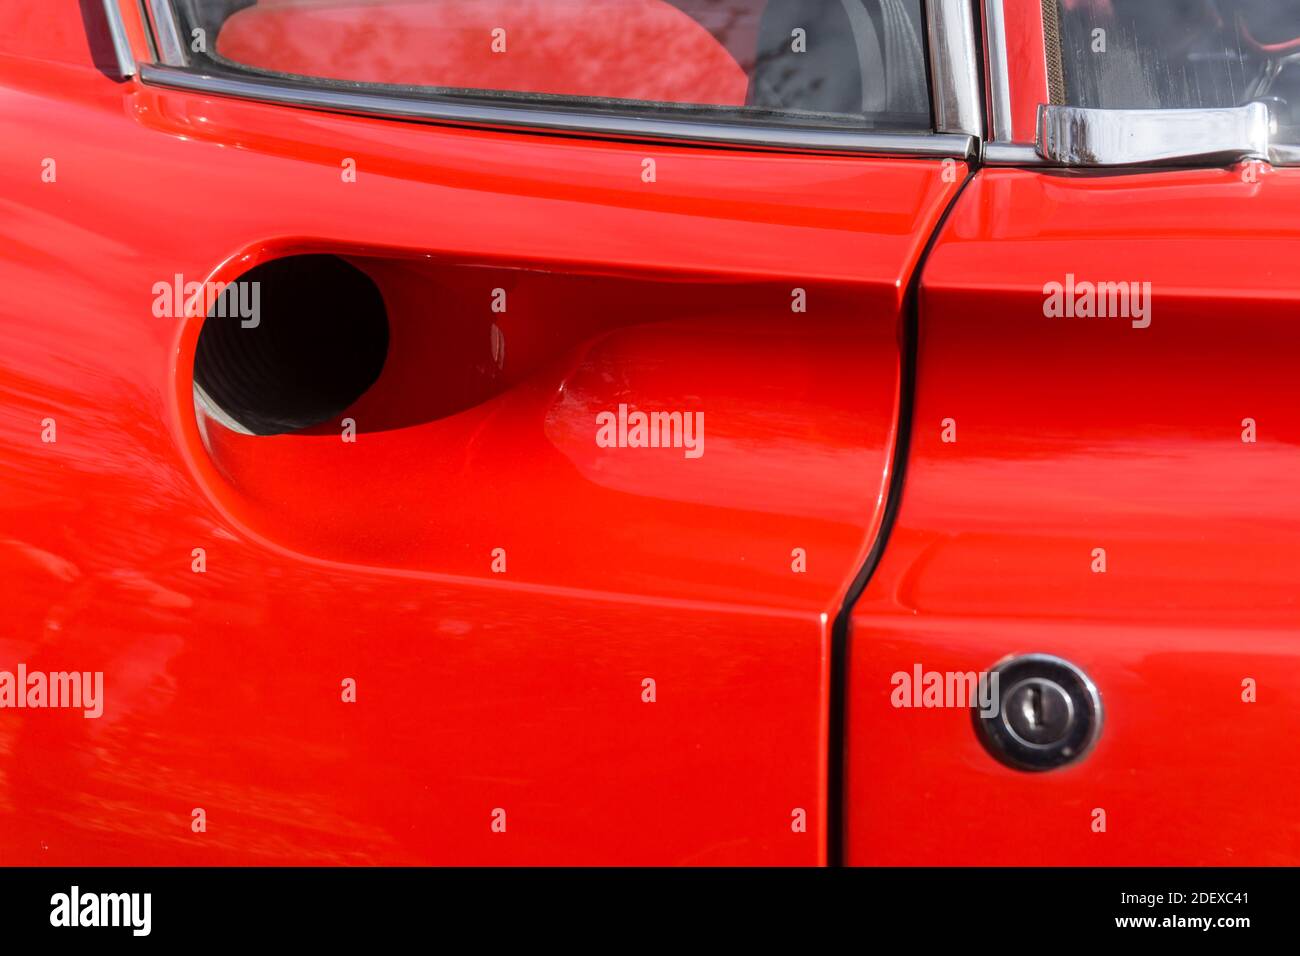 Close up detail of the side air intake and door on a red 1970s Ferrari Dino 246 GT sports car Stock Photo